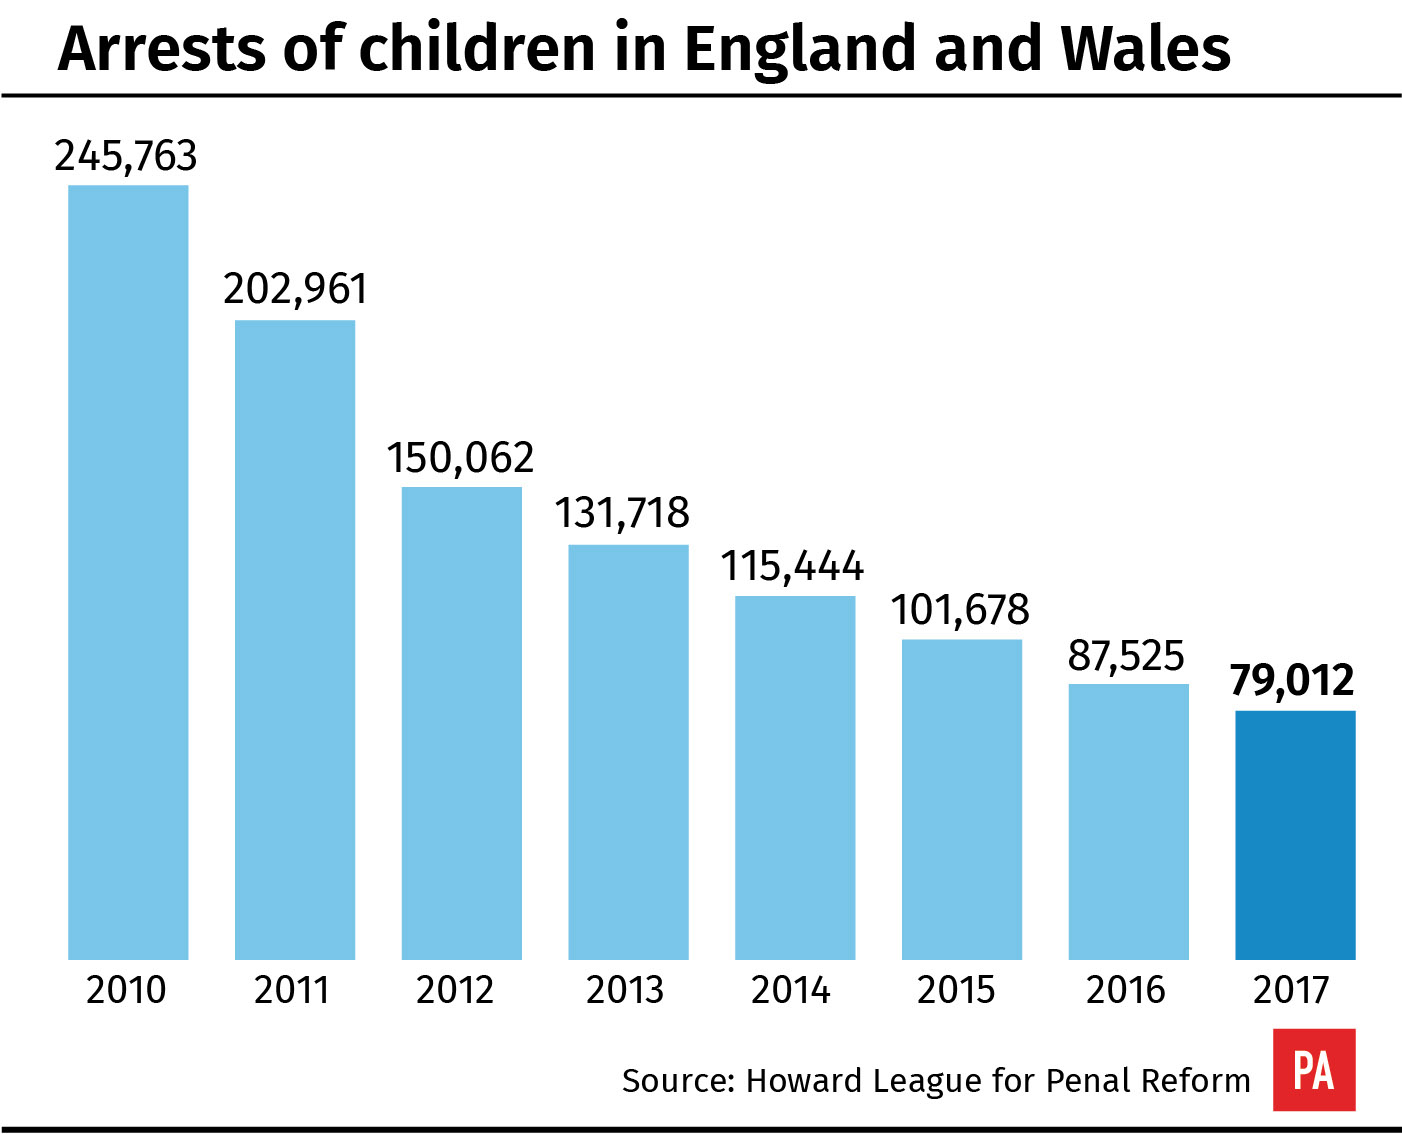 Child arrests in England and Wales